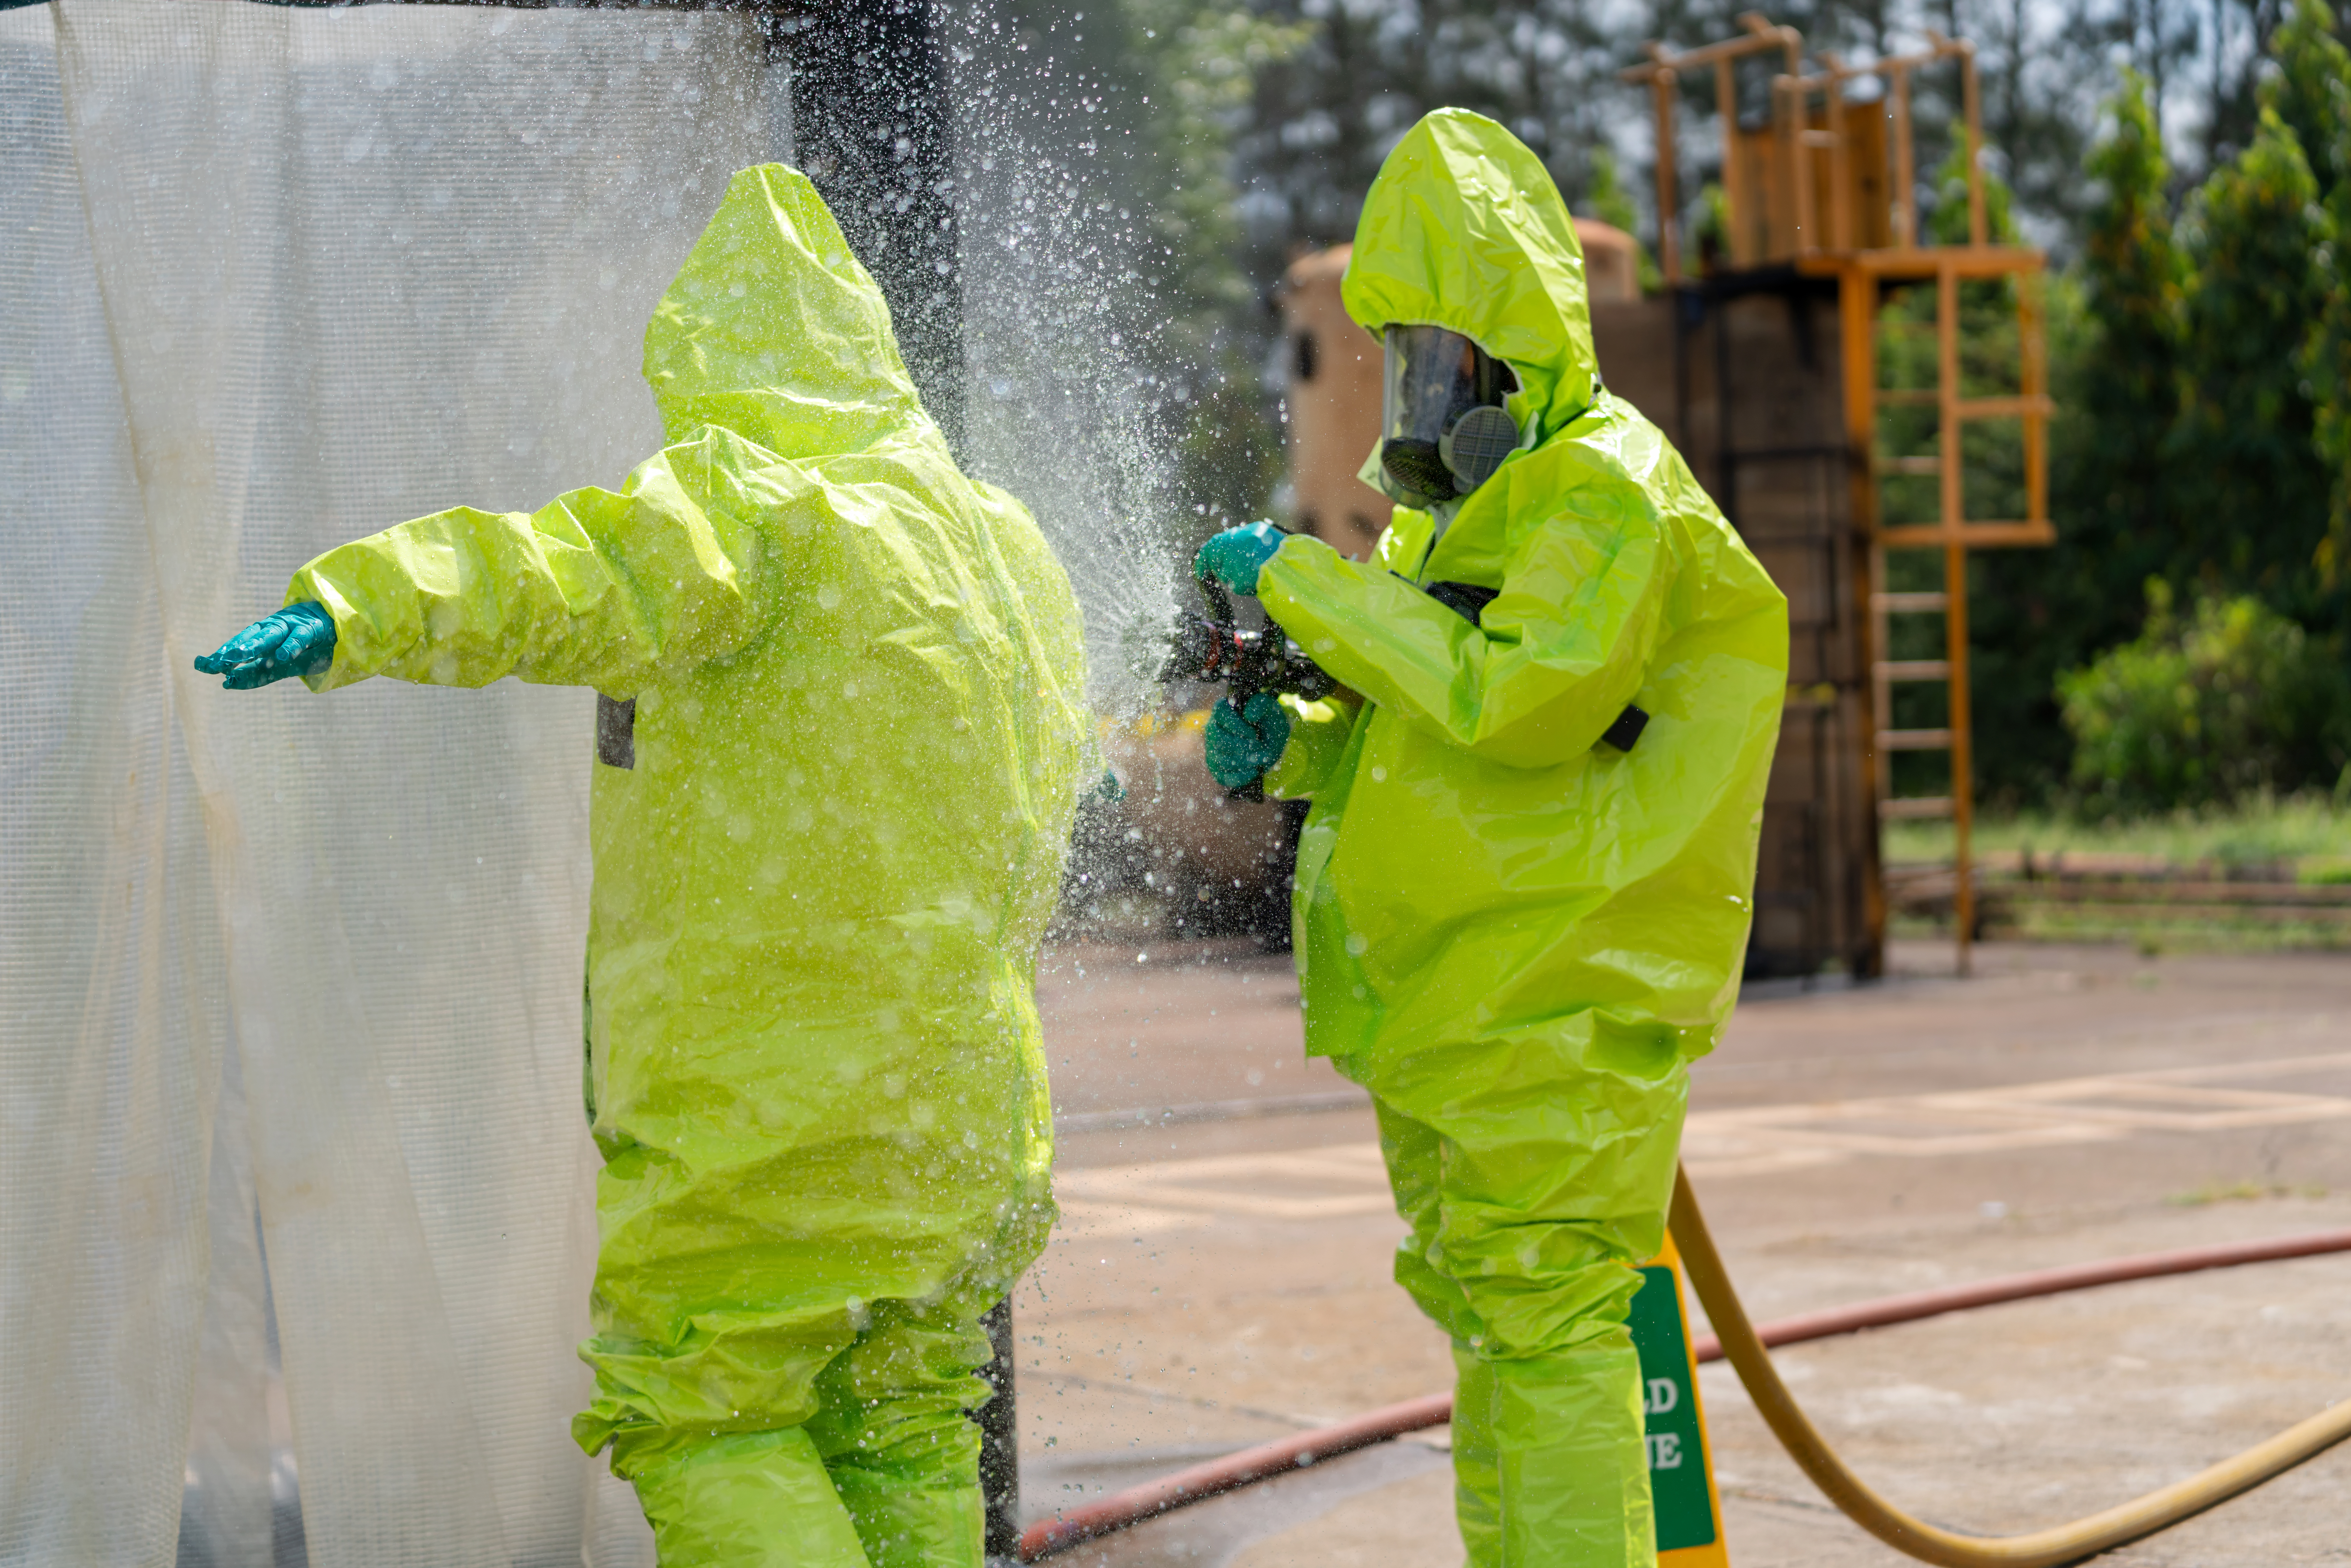 Two individuals in protective hazmat suits cleaning a surface with a high-pressure water spray outdoors.